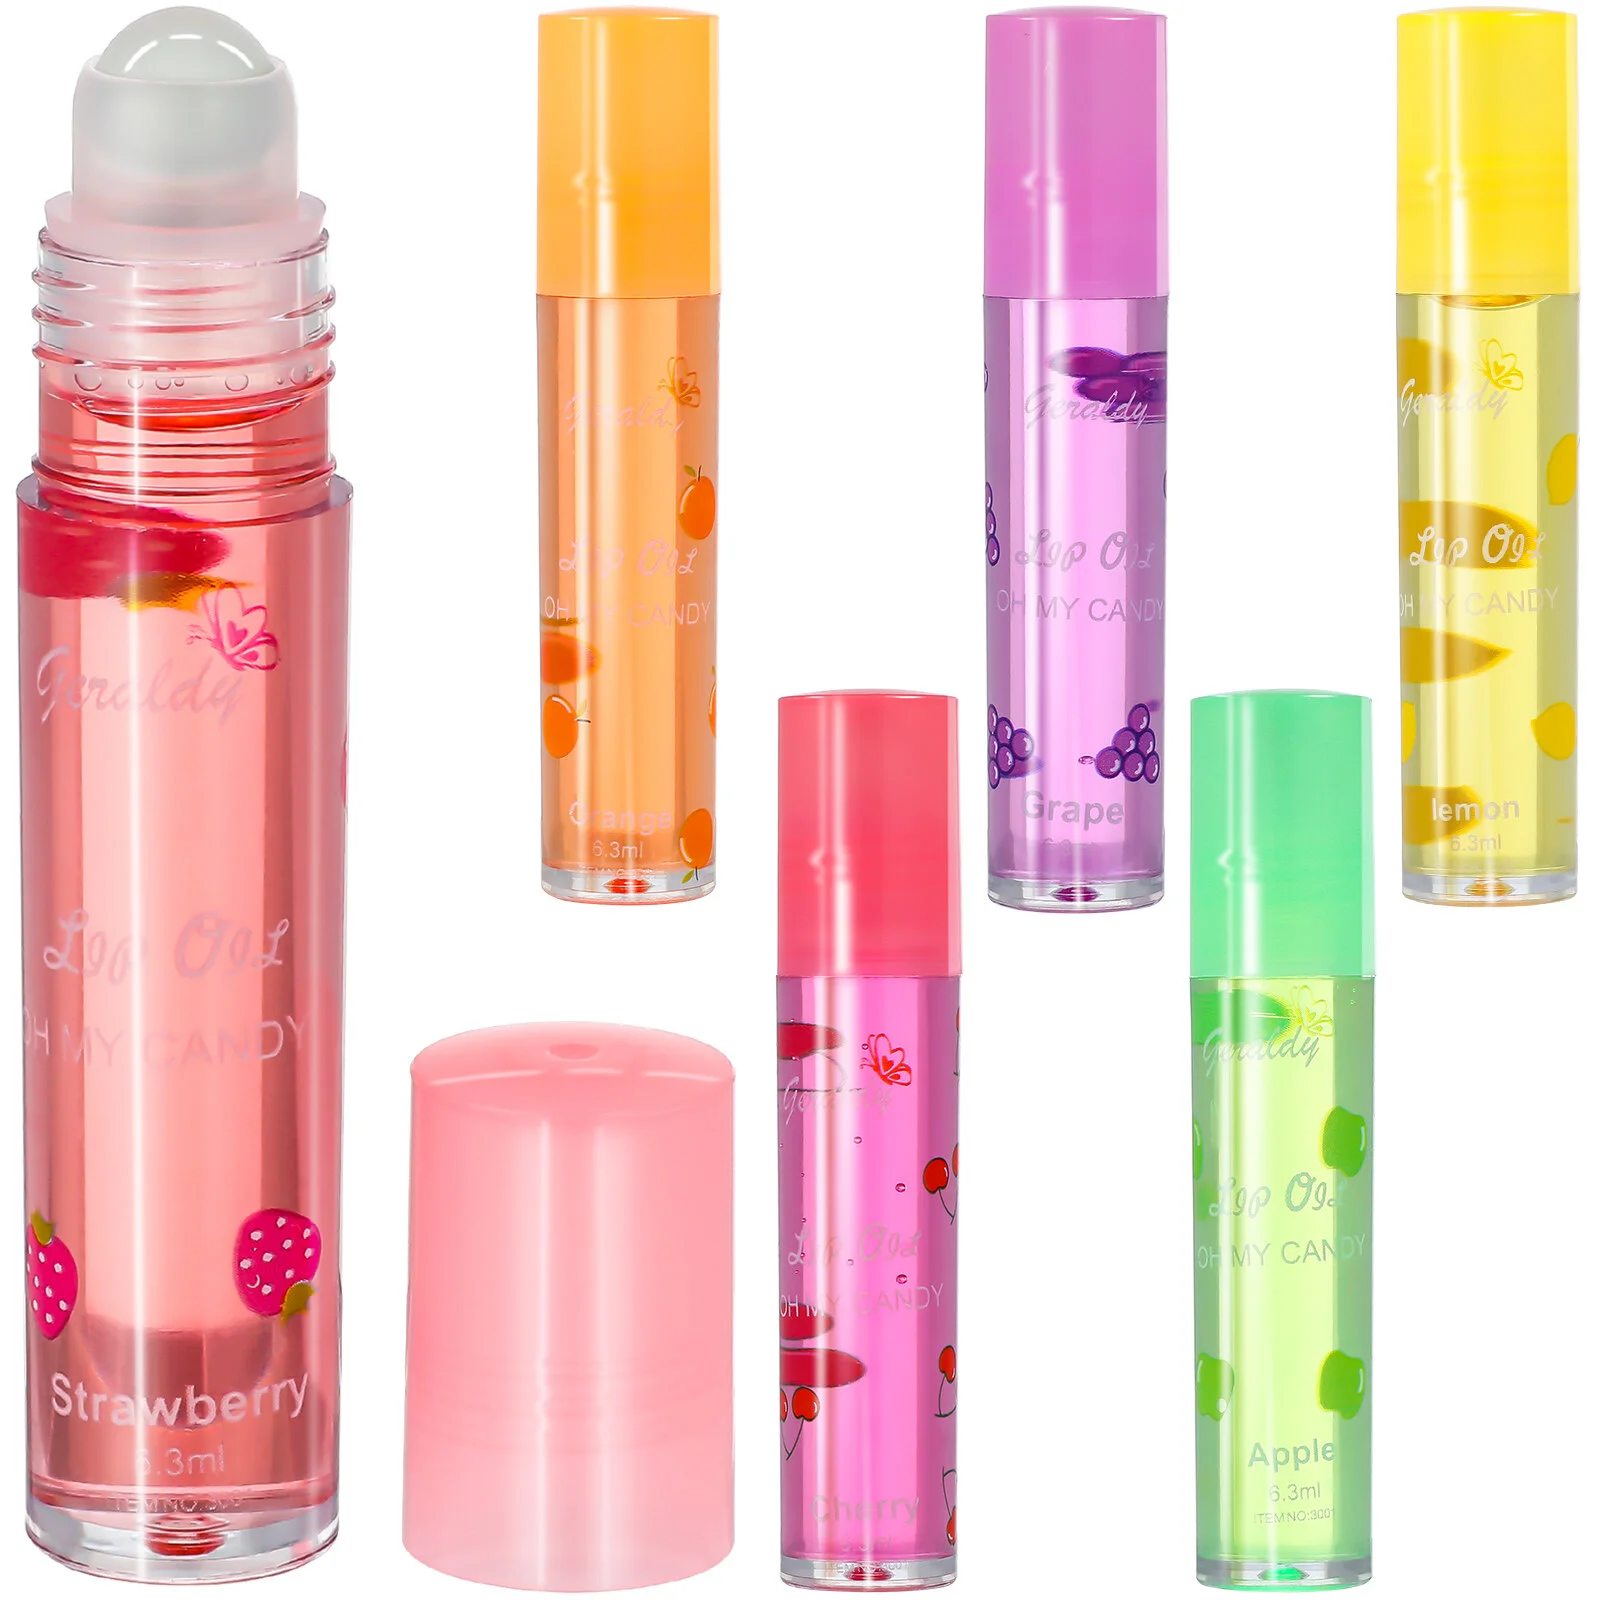 

6 Pcs Base Color Changing Lip Gloss Transparent Pomade Protector Fruit-flavored Lipstick Hydrated Liquid Miss